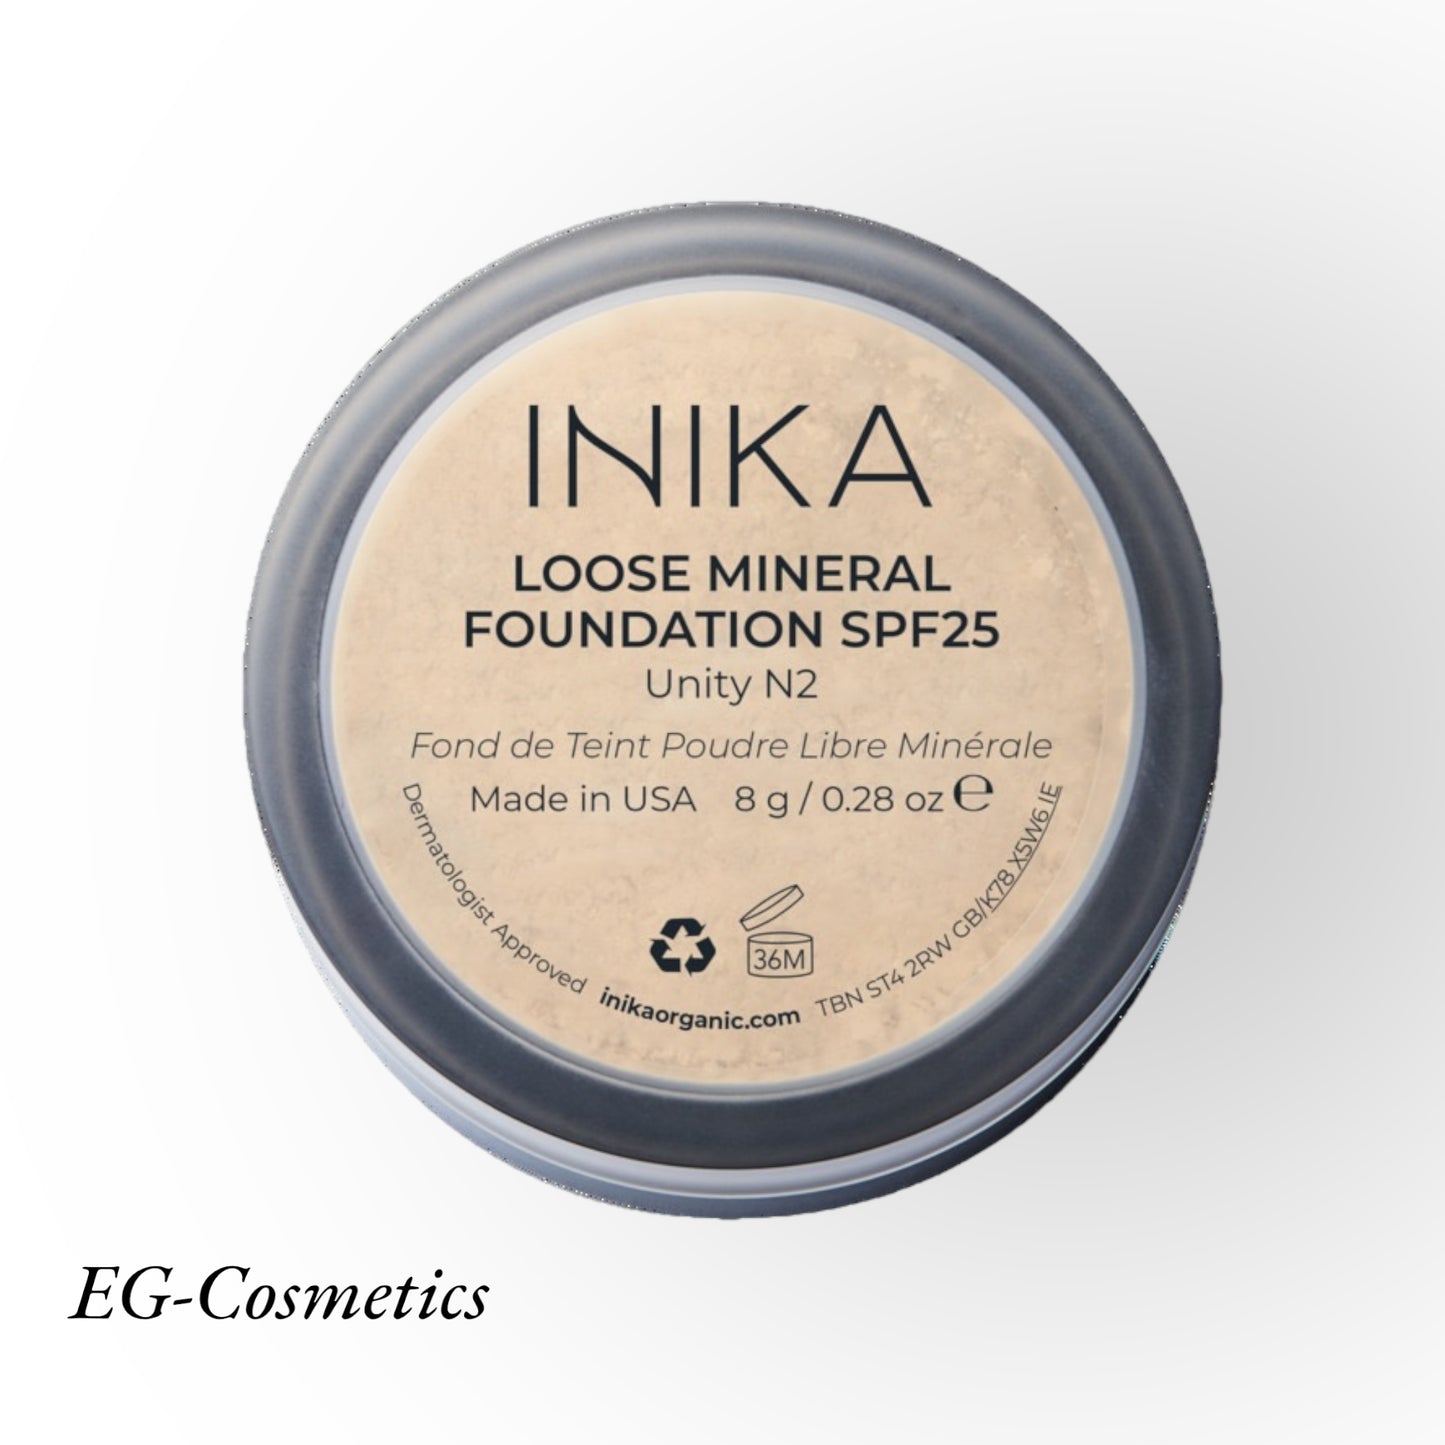 INIKA Certified Loose Mineral Foundation SPF25 8g UNITY